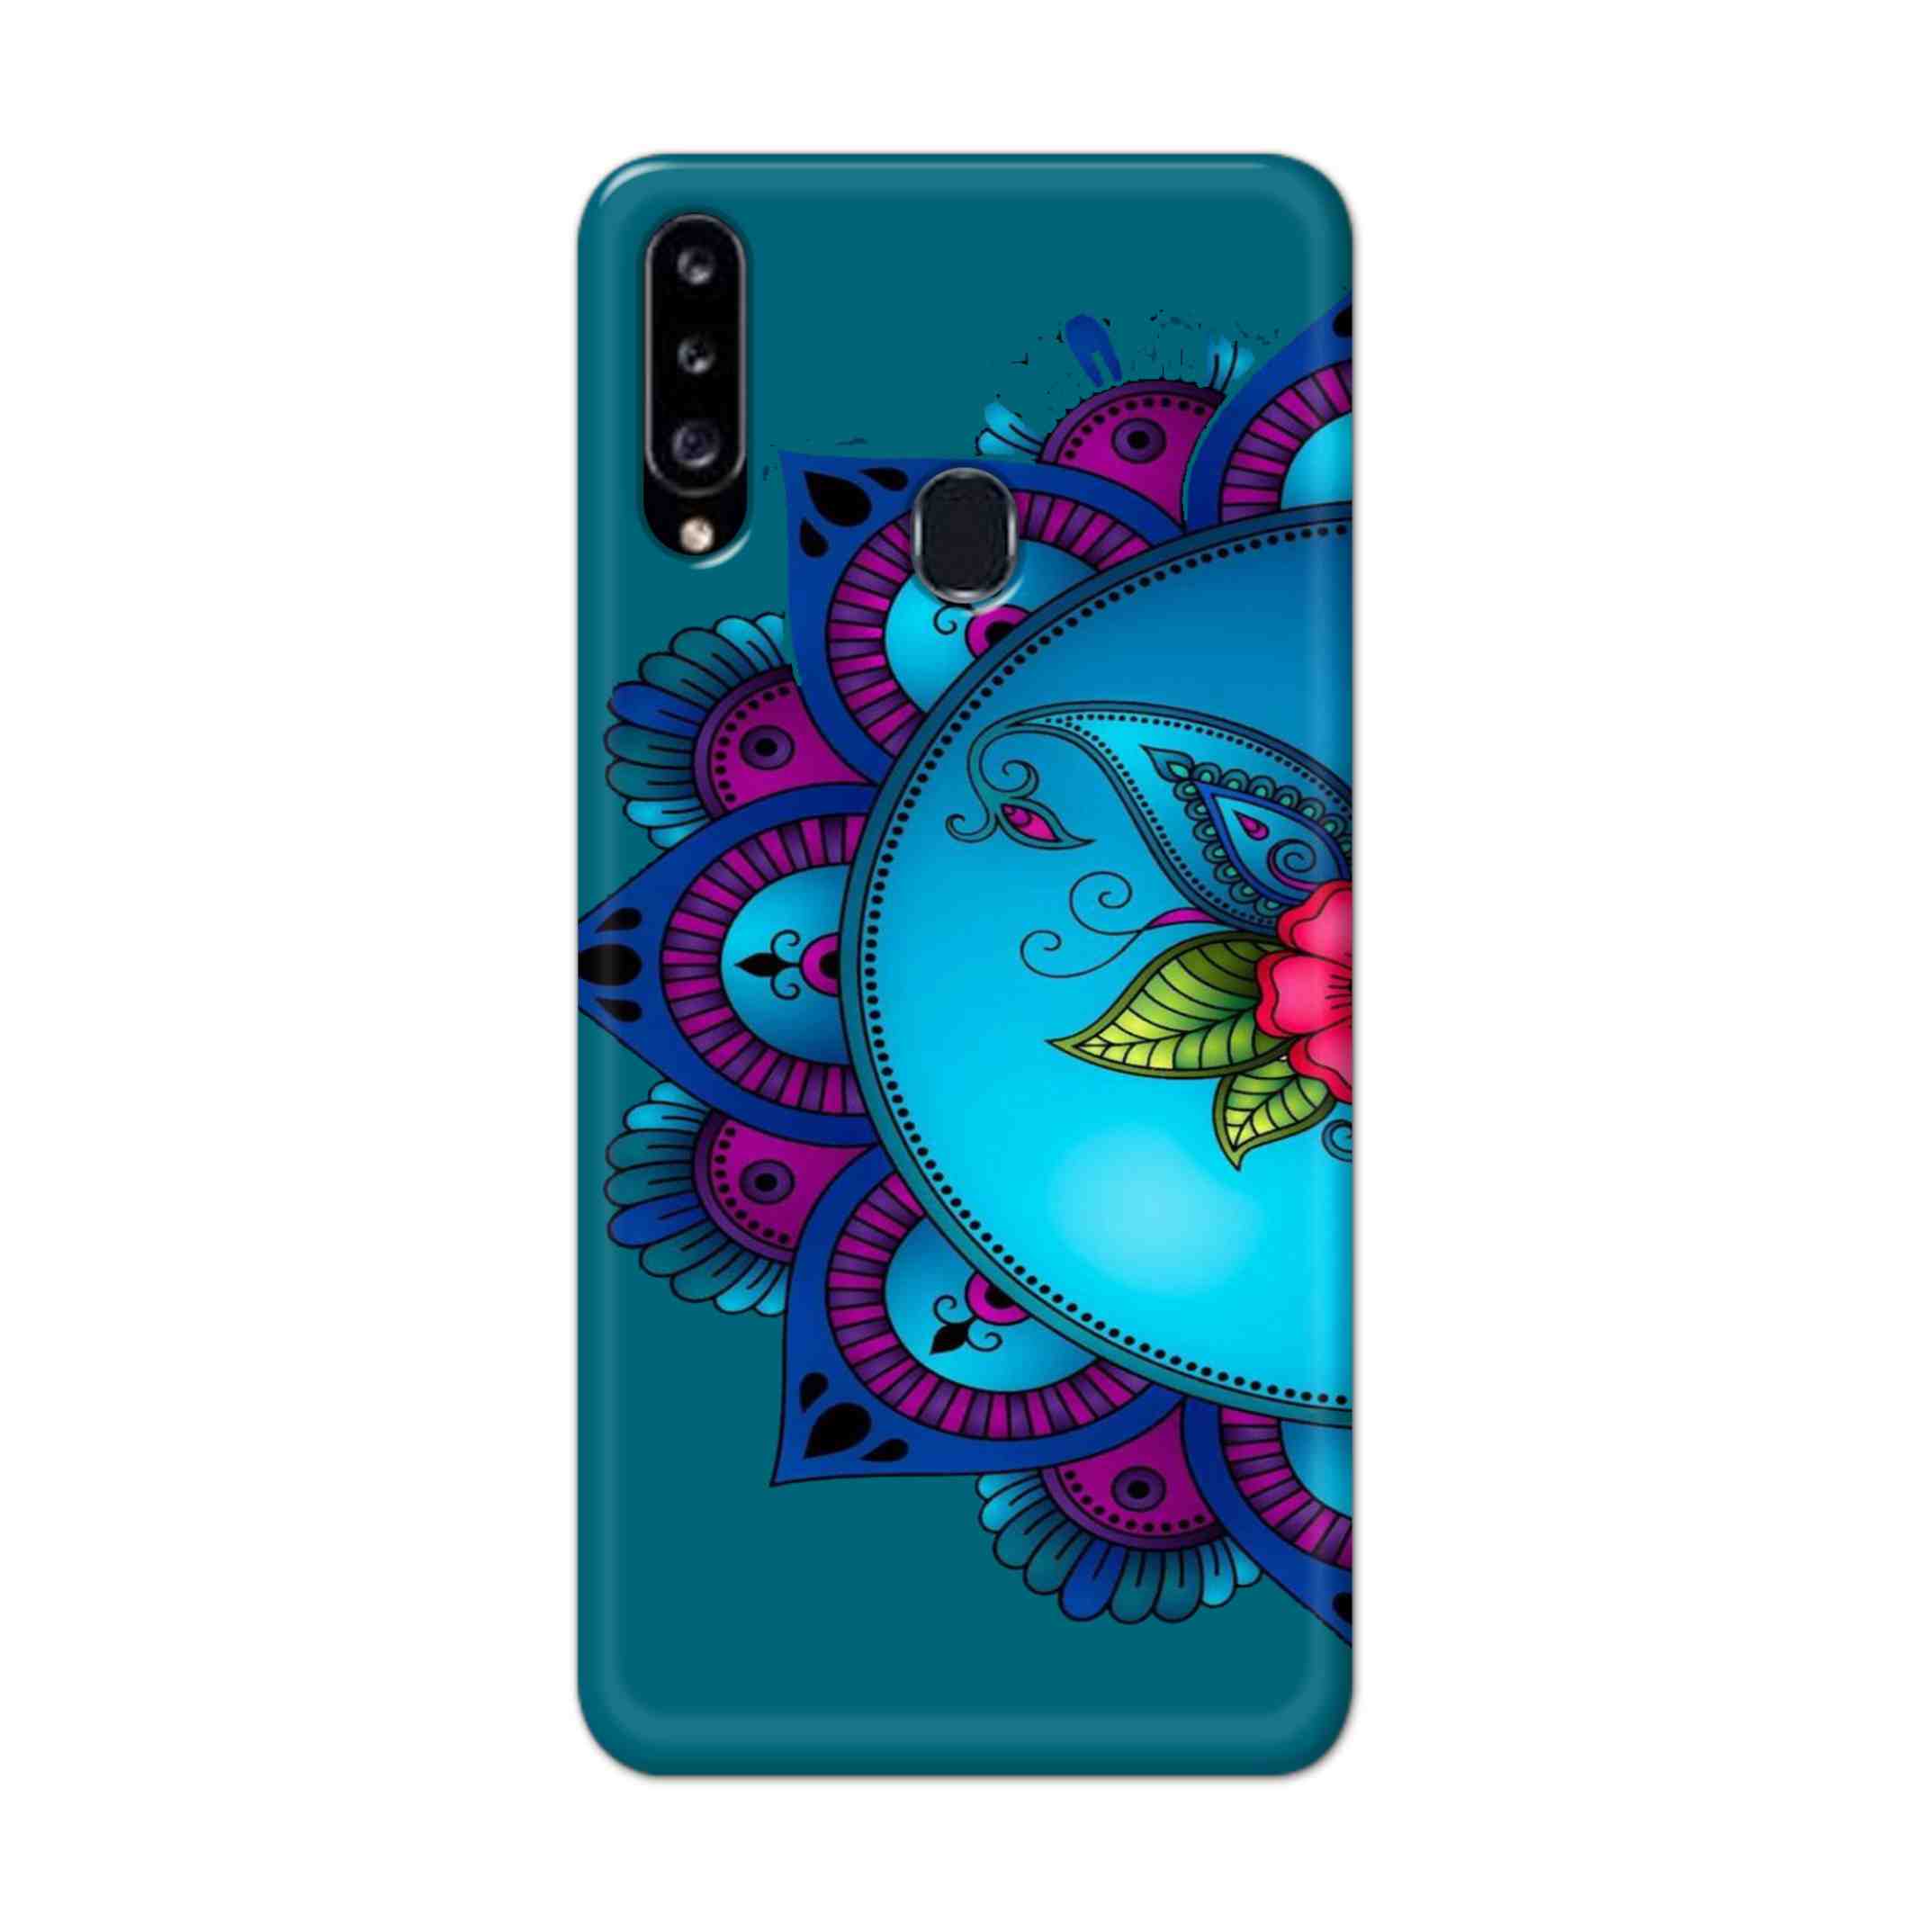 Buy Star Mandala Hard Back Mobile Phone Case Cover For Samsung Galaxy A21 Online